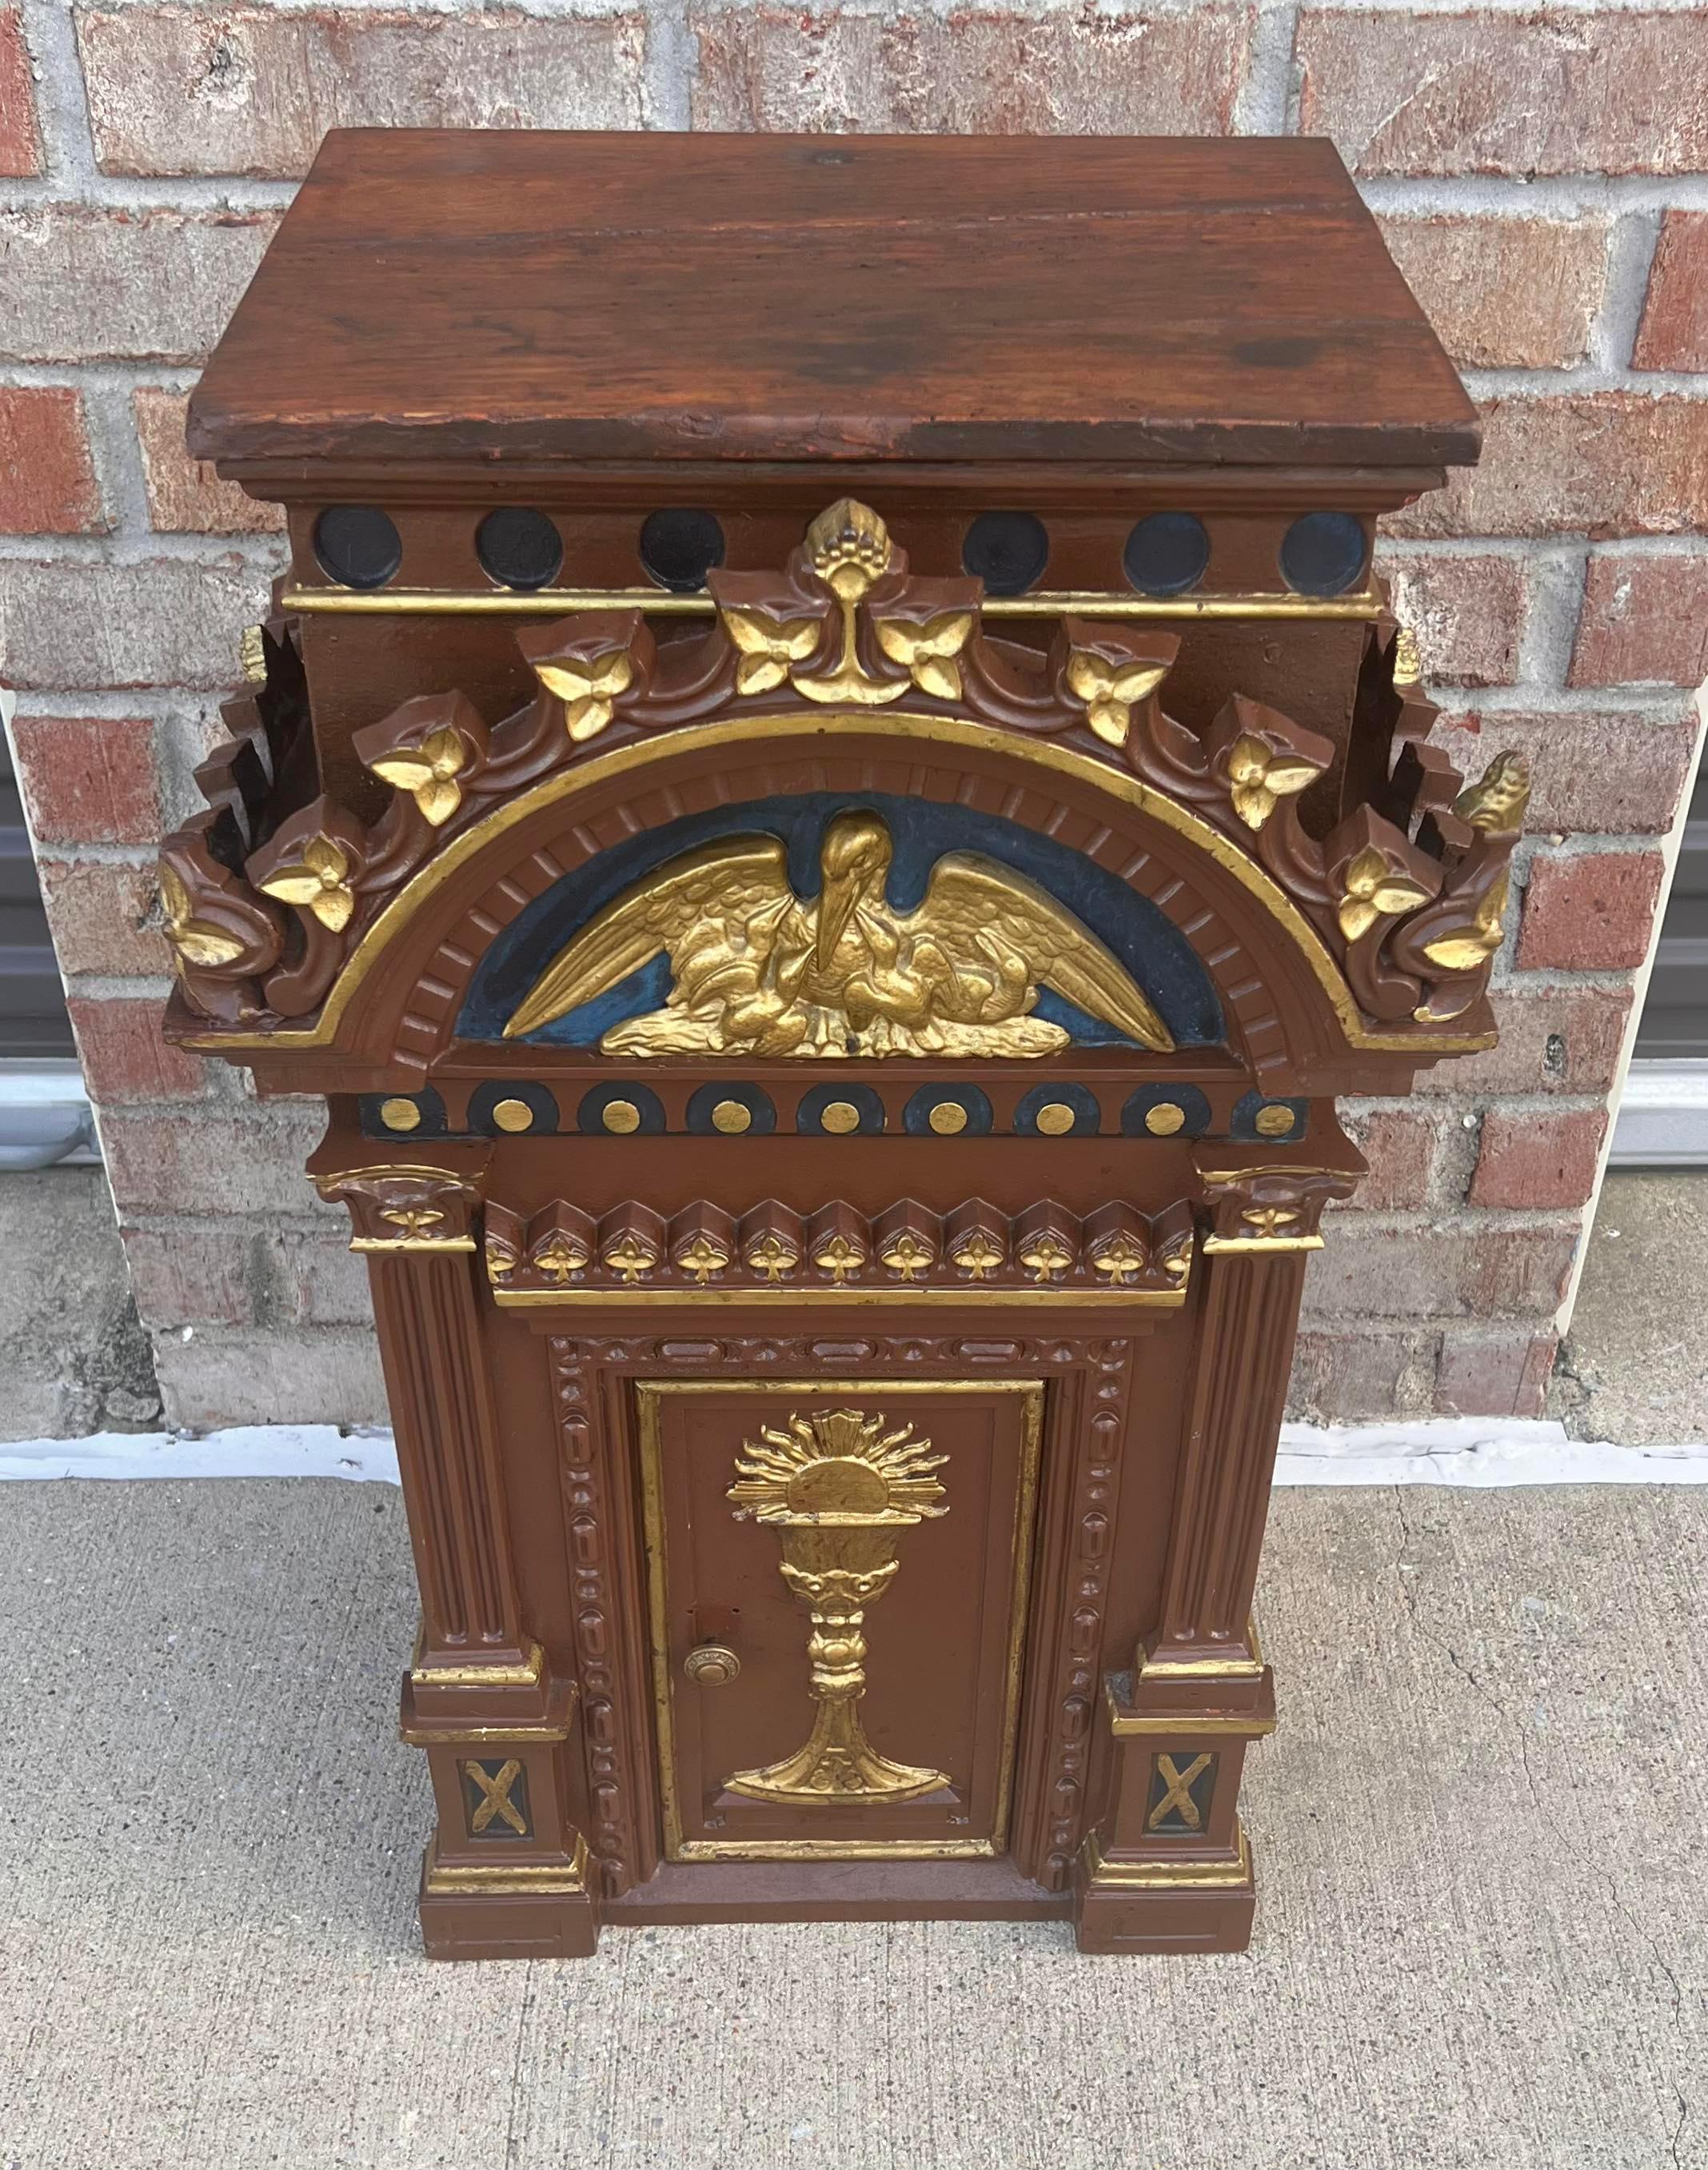 A scarce antique European religious polychromed gilt wood and cast iron mounted church altar tabernacle.

Hand-crafted in the 19th century, high-quality solid wood and cast iron construction, in polychrome painted finish, Empire style, sculptural